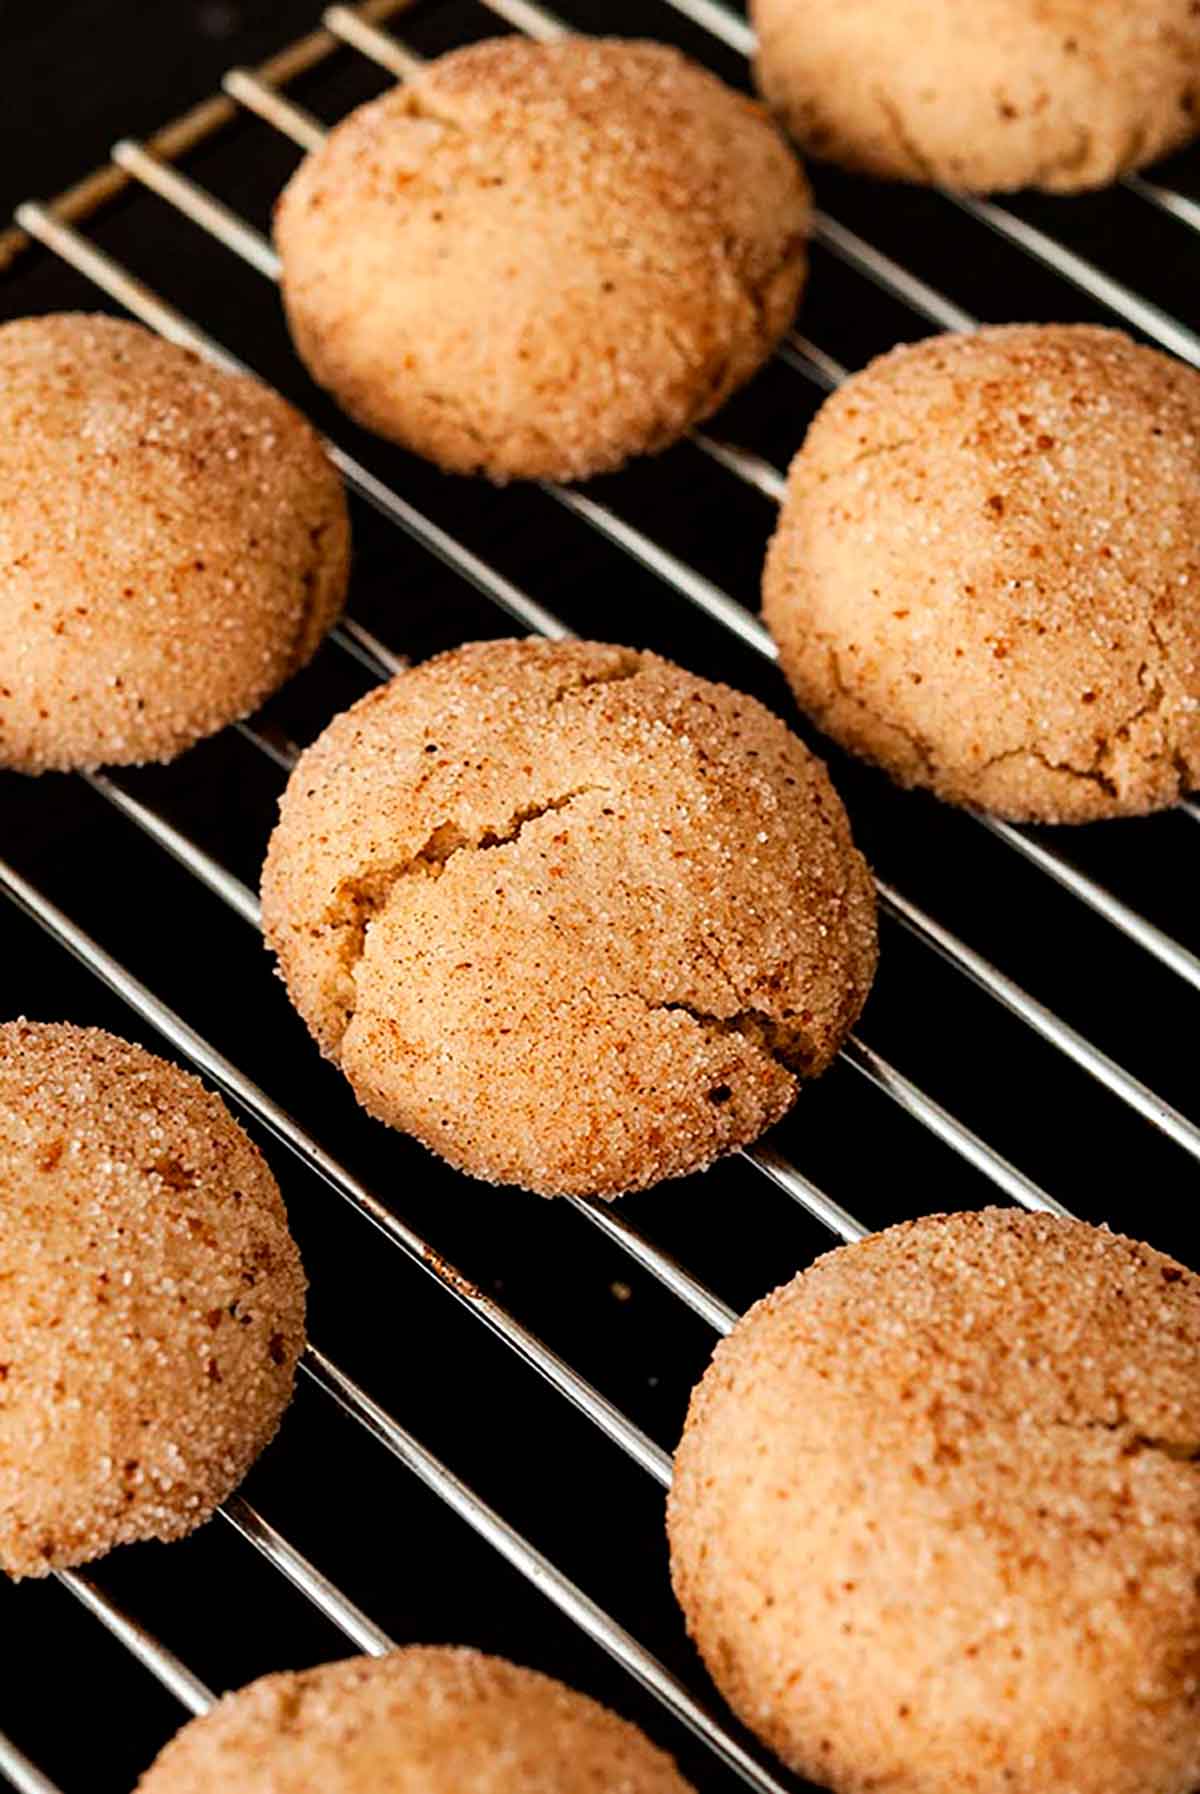 8 baked snickerdoodles on a baking rack.